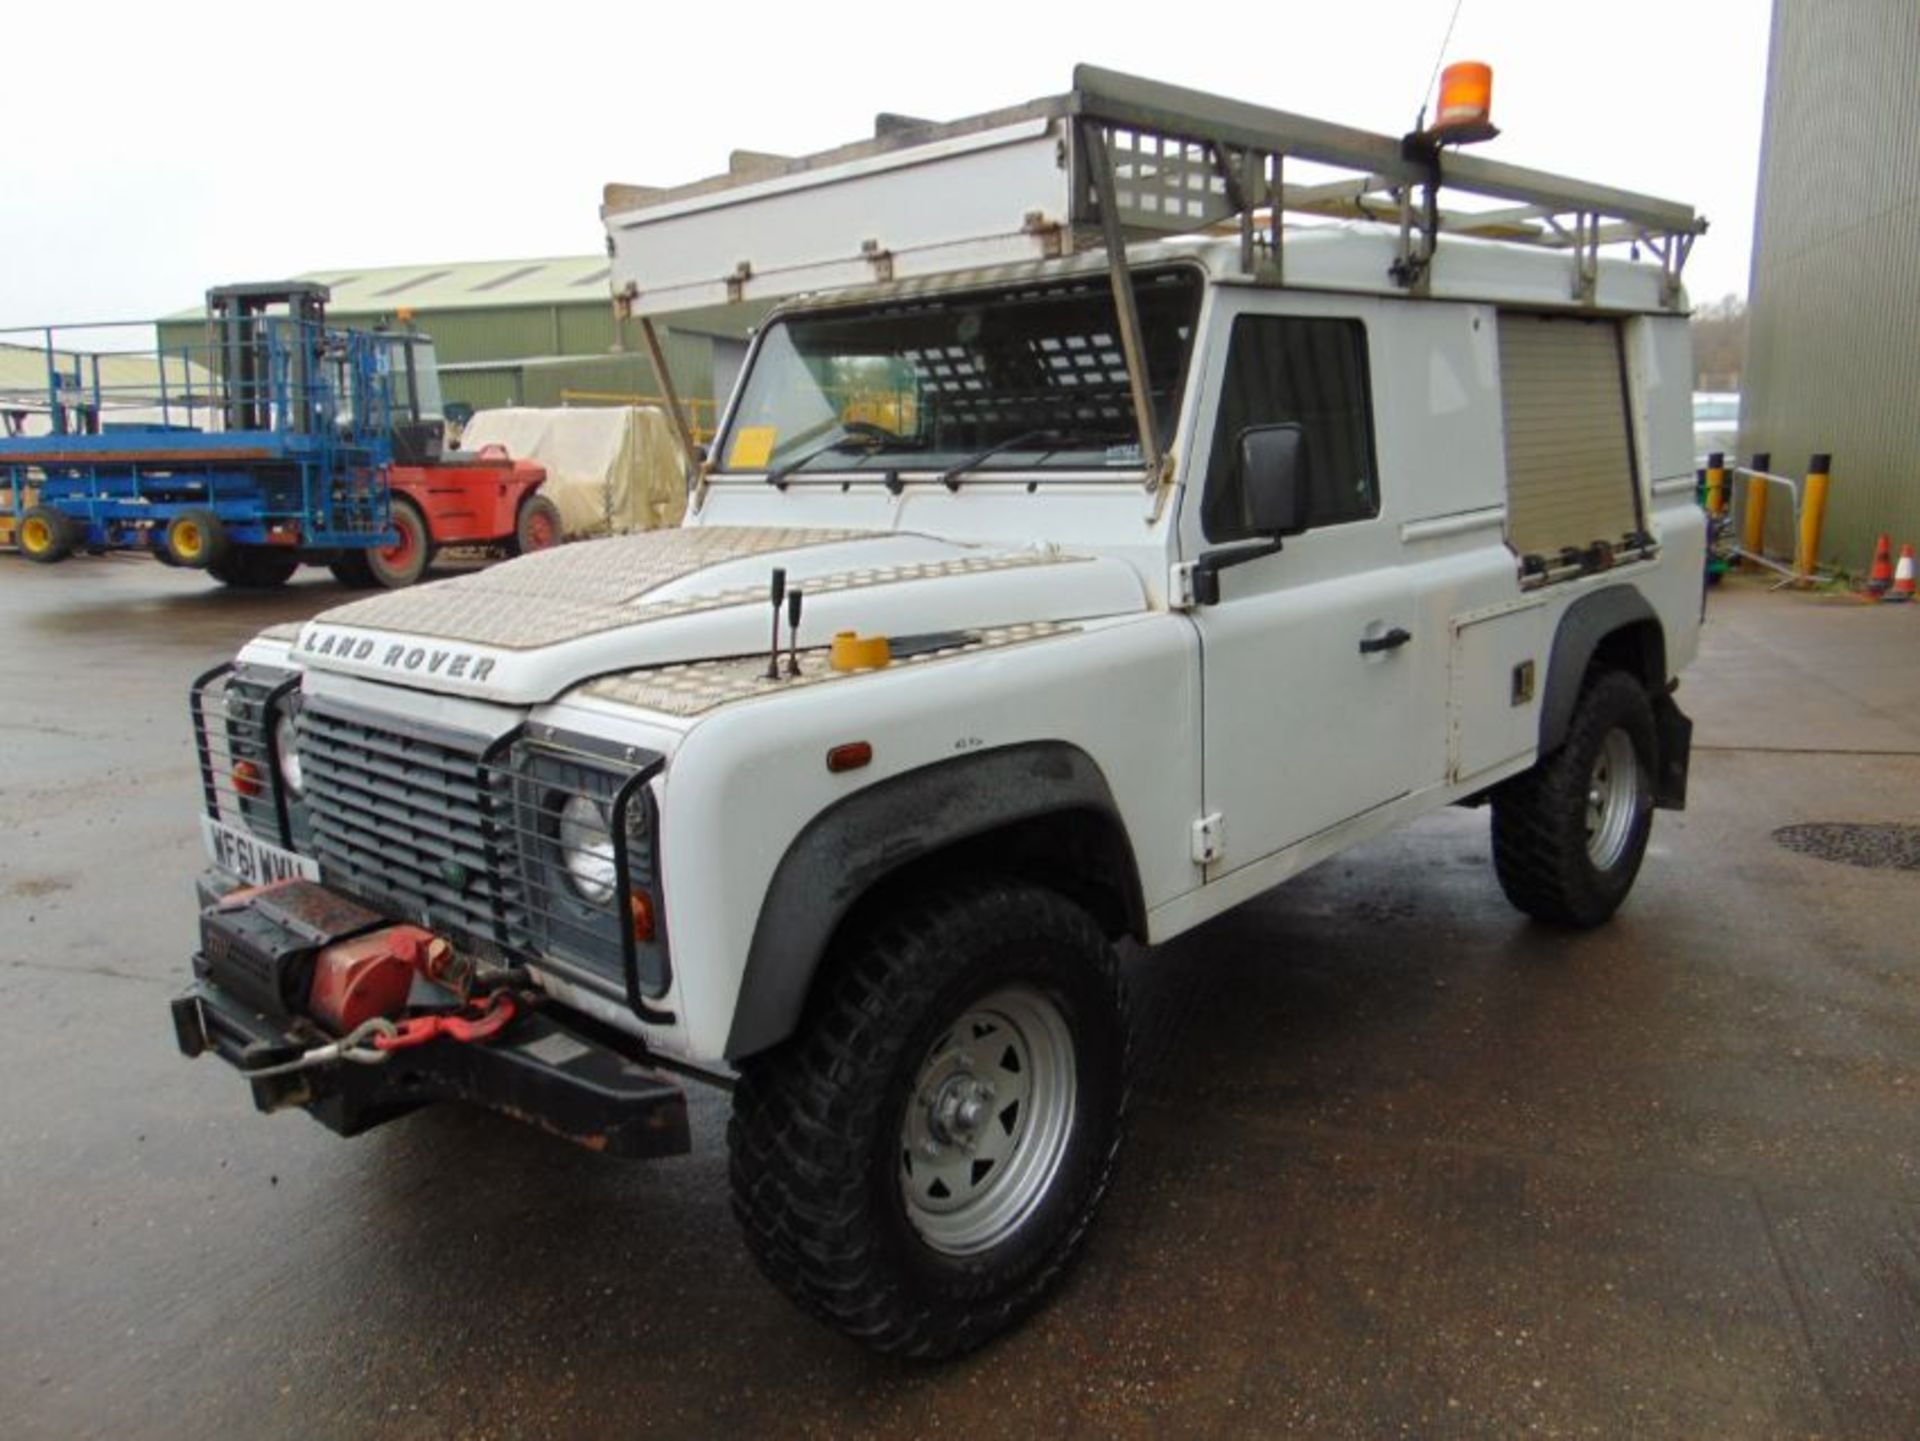 2011 Land Rover Defender 110 Puma hardtop 4x4 mobile workshop with Winch Etc. From UK Utility Co. - Image 3 of 31